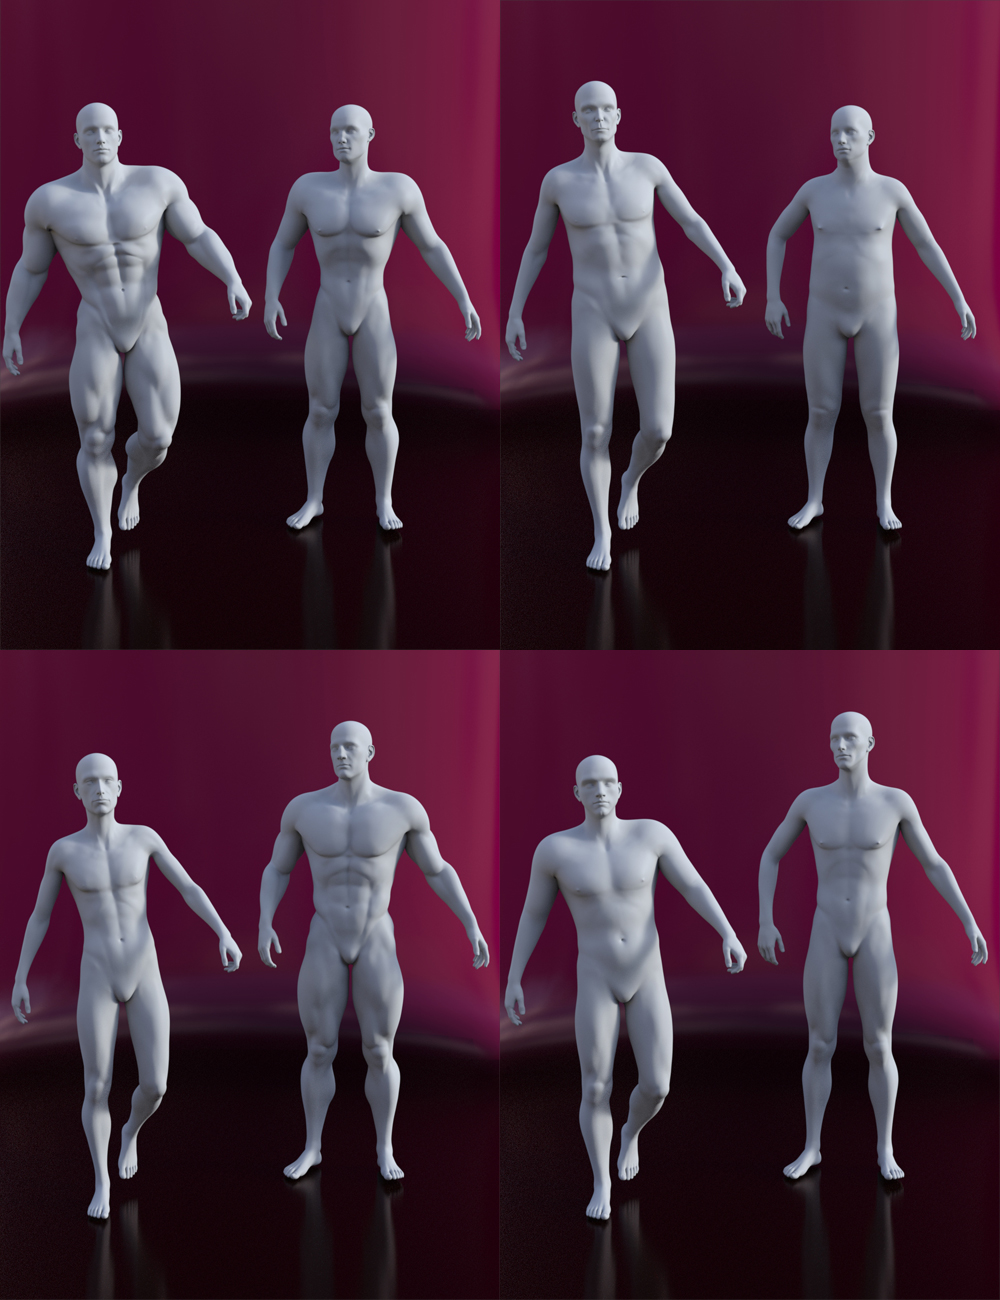 You Choose for Genesis 3 Male(s) by: Muscleman, 3D Models by Daz 3D